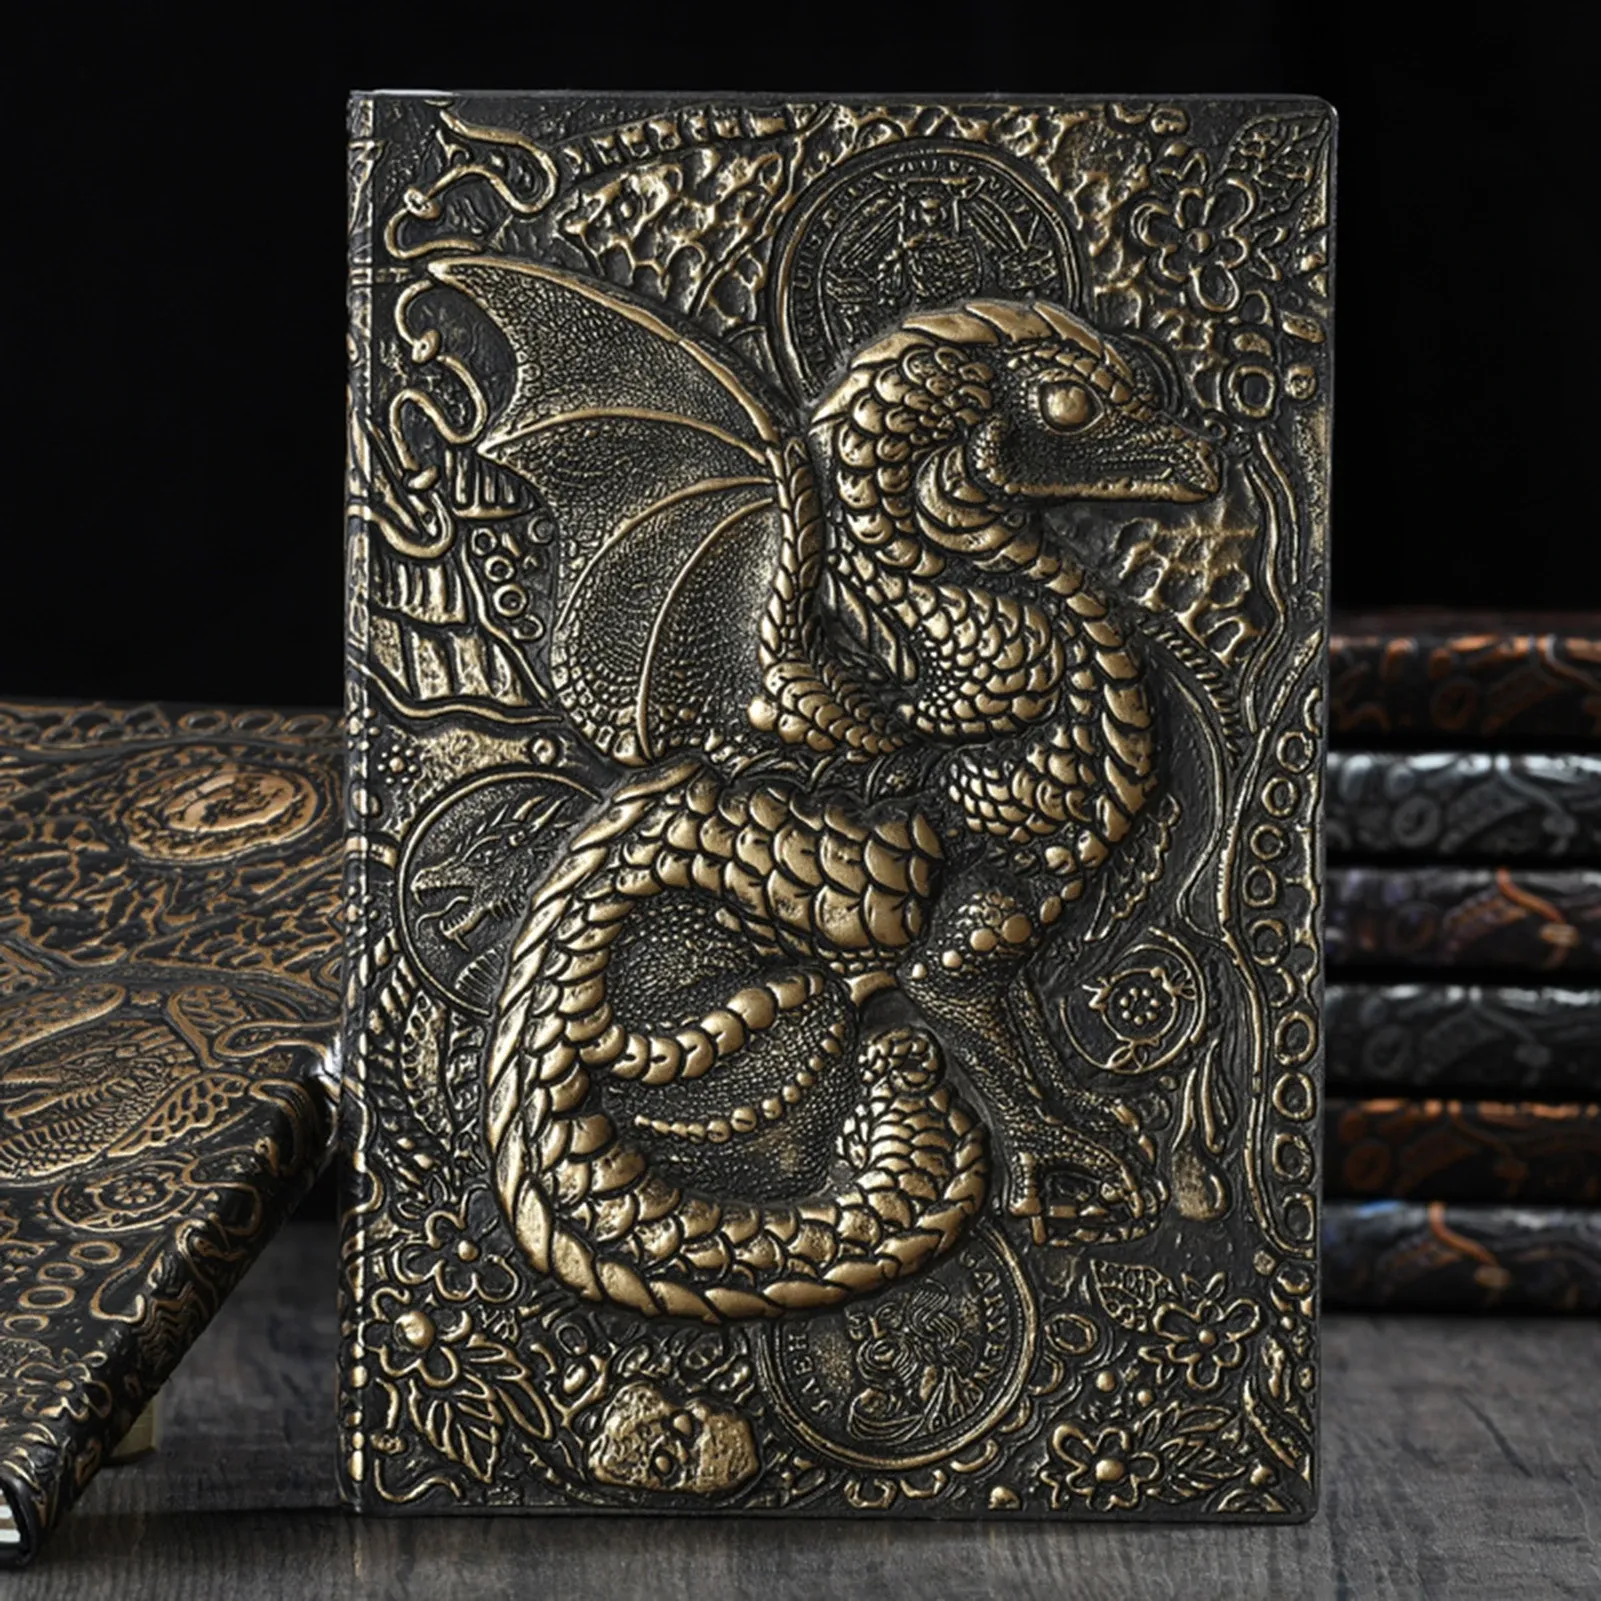 Notepads 3d Flying Dragon Journal Emed Writing Notebook Handmade Leather Cover A5 Notebooks Gift for Men Travel Thoughts Notes Poetry